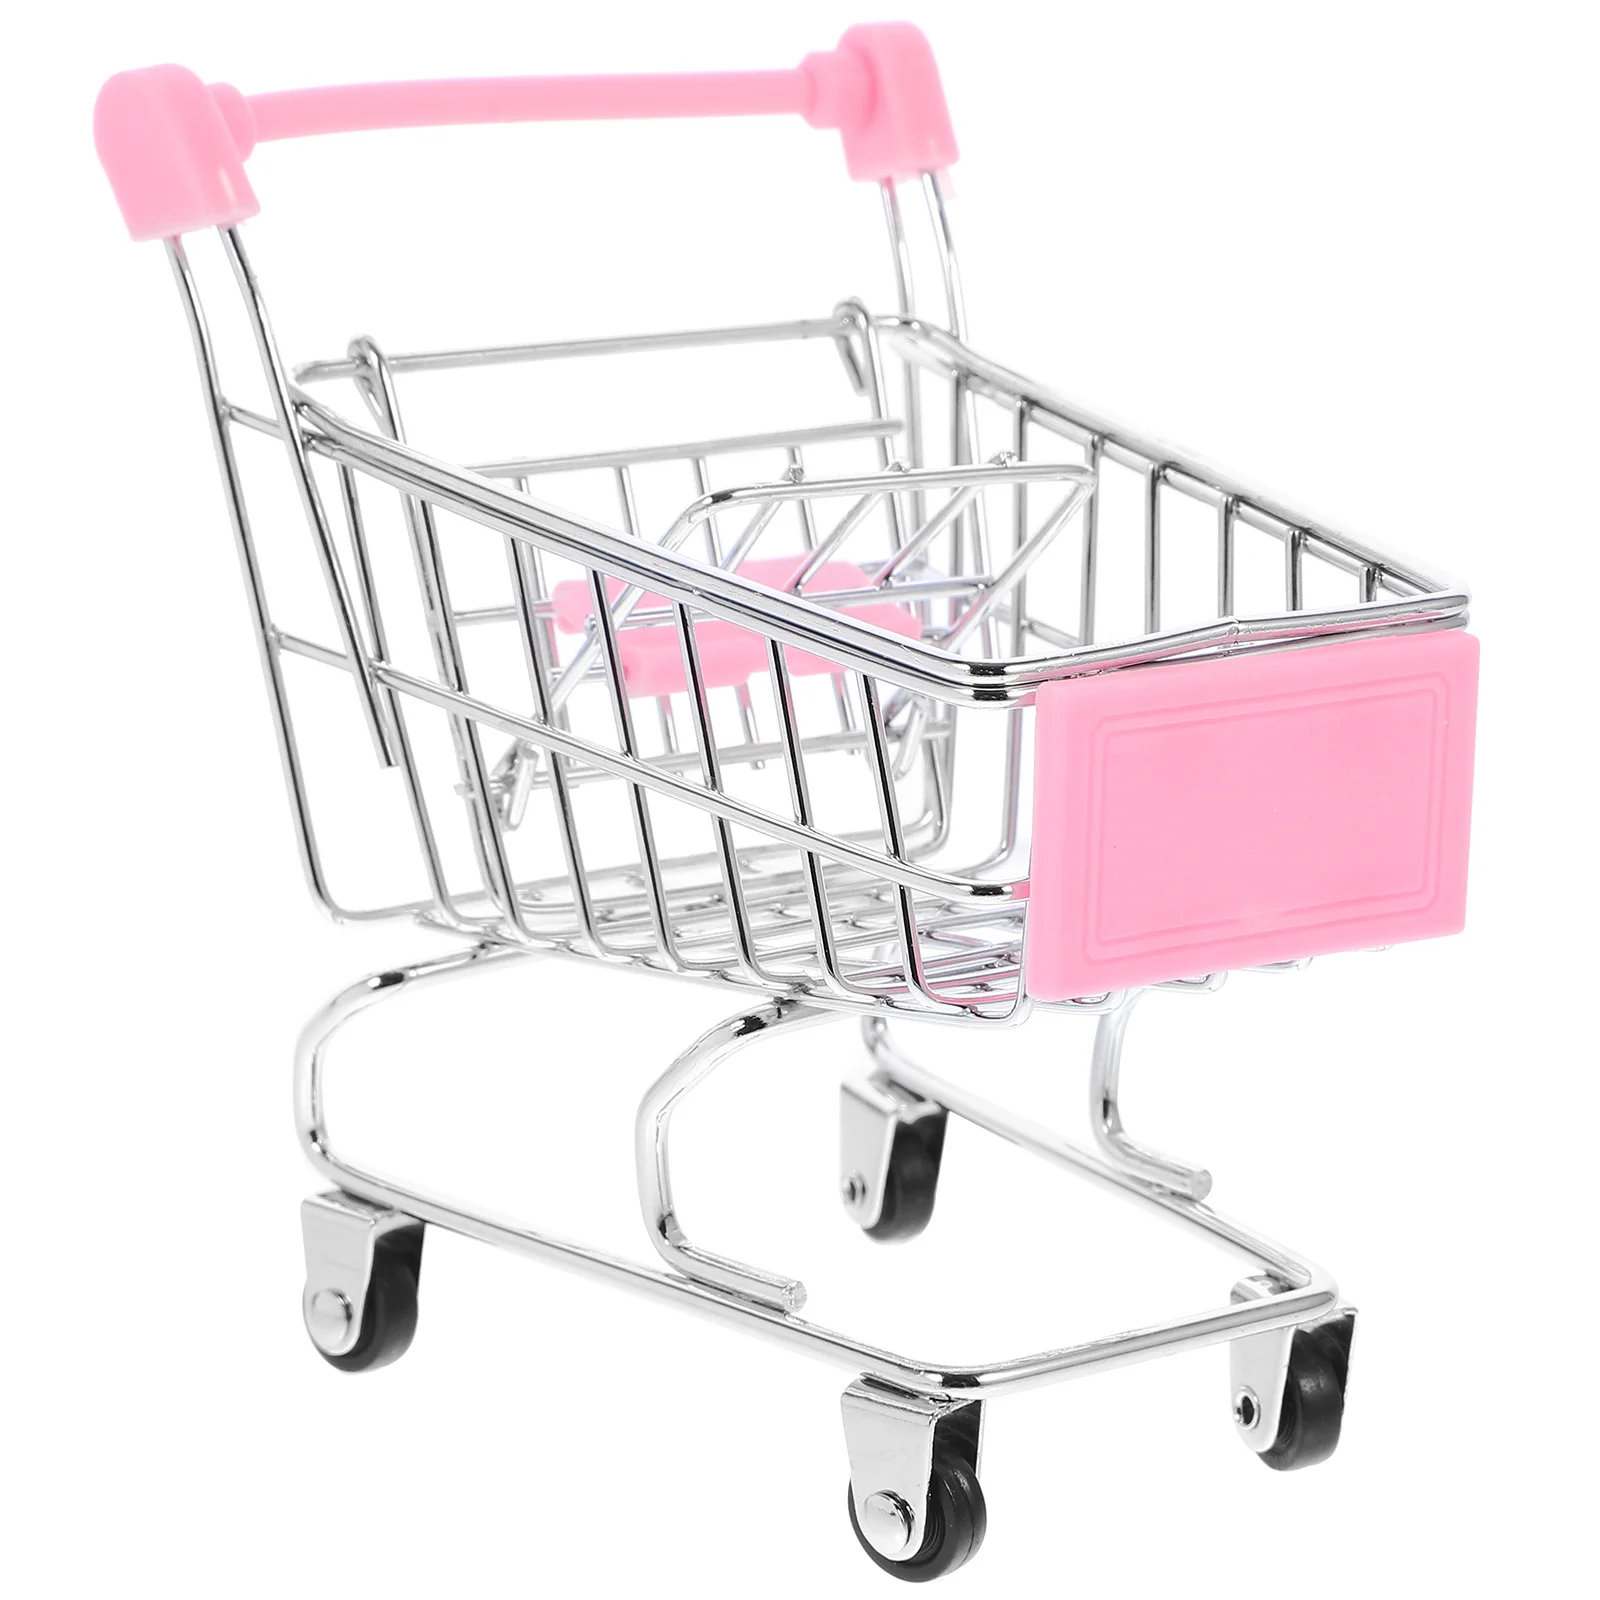 Children Shopping Cart for Pretending Game Delicate Mini Shopping Cart Accessory Miniature Decoration Chopping Scene small trophy school awards trophies tiny delicate music kids competition mini plastic